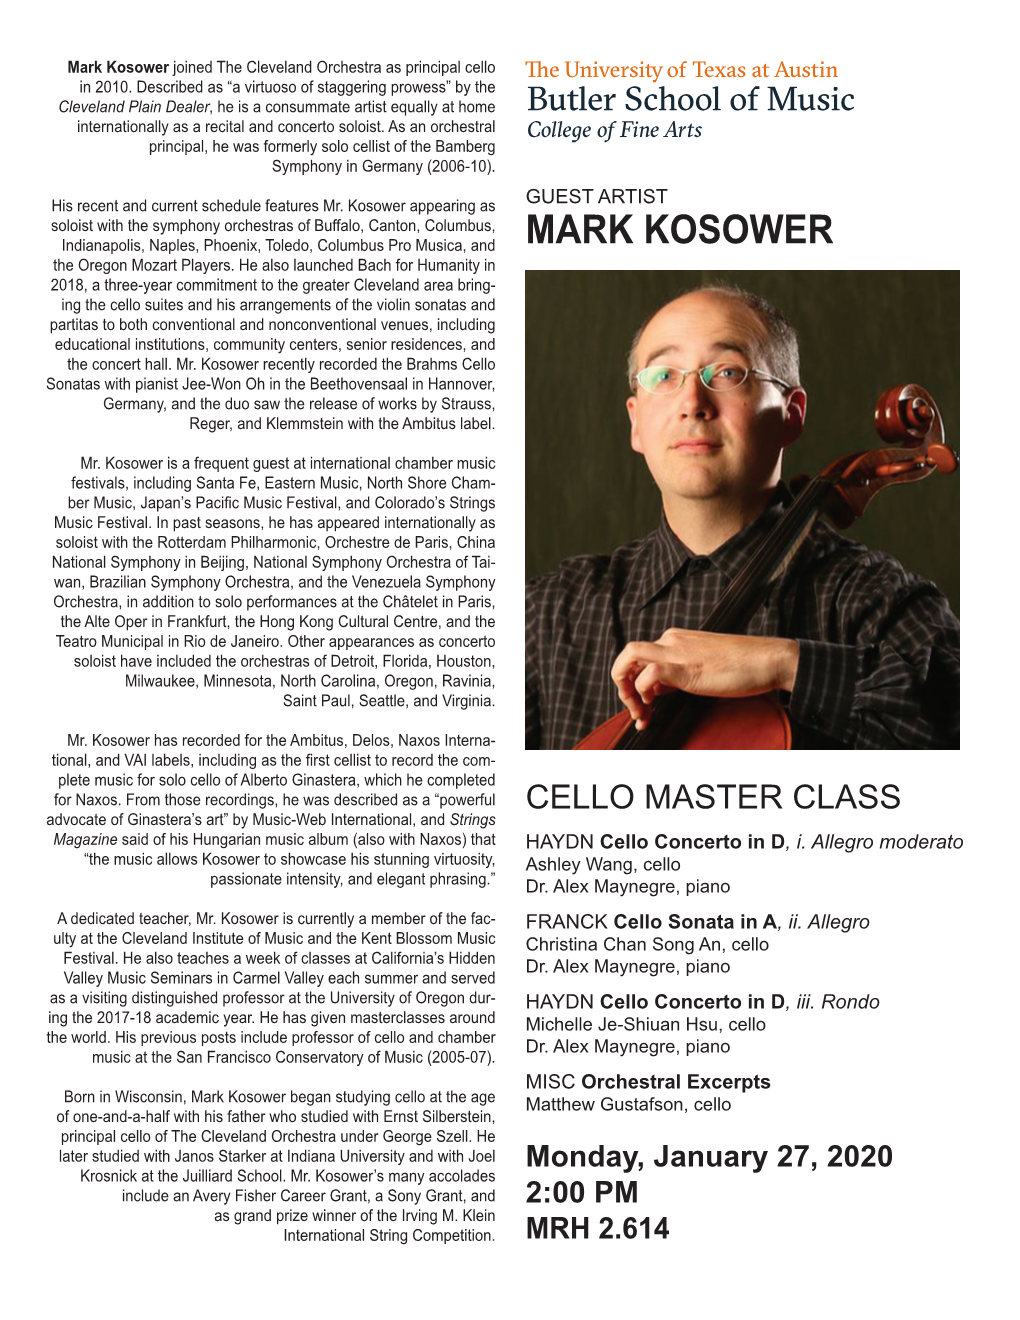 Mark Kosower Joined the Cleveland Orchestra As Principal Cello in 2010